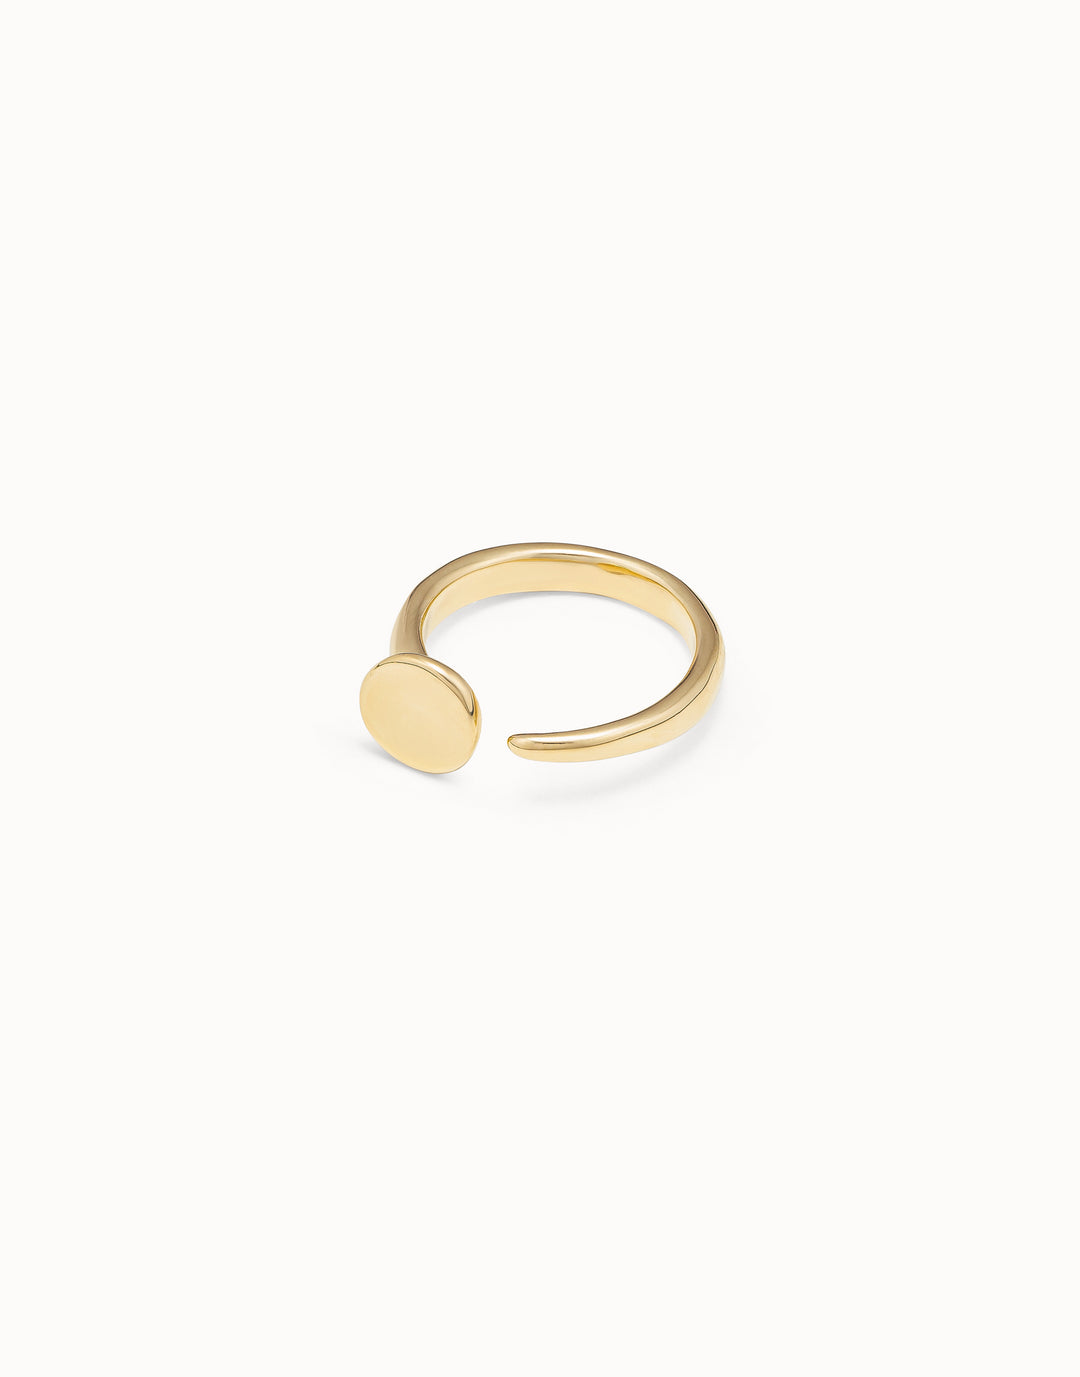 HERITAGE RING - GOLD - Kingfisher Road - Online Boutique